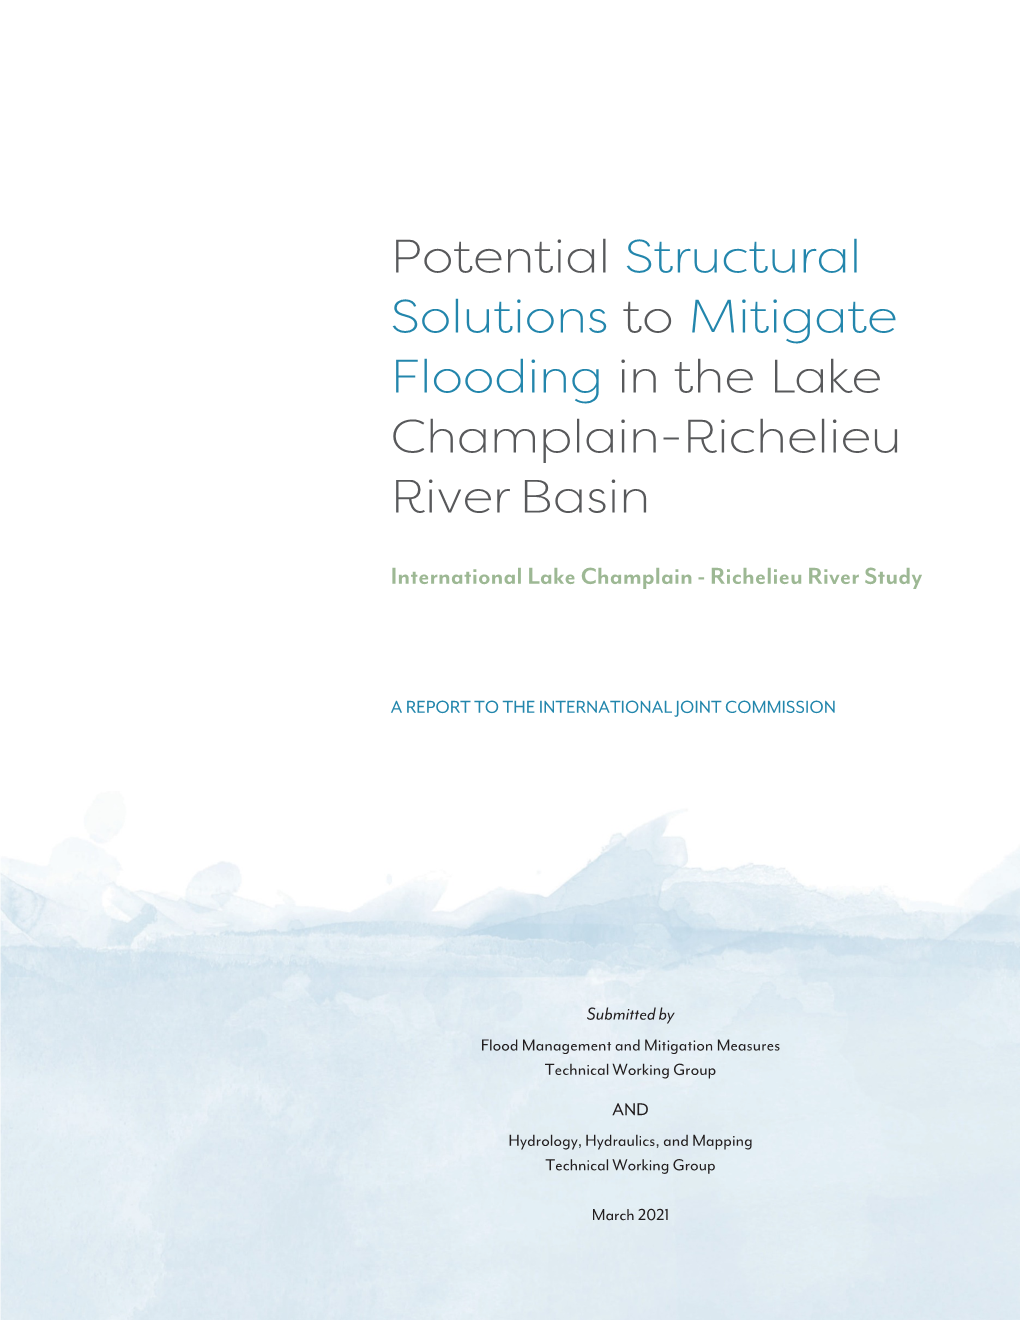 Potential Structural Solutions Report